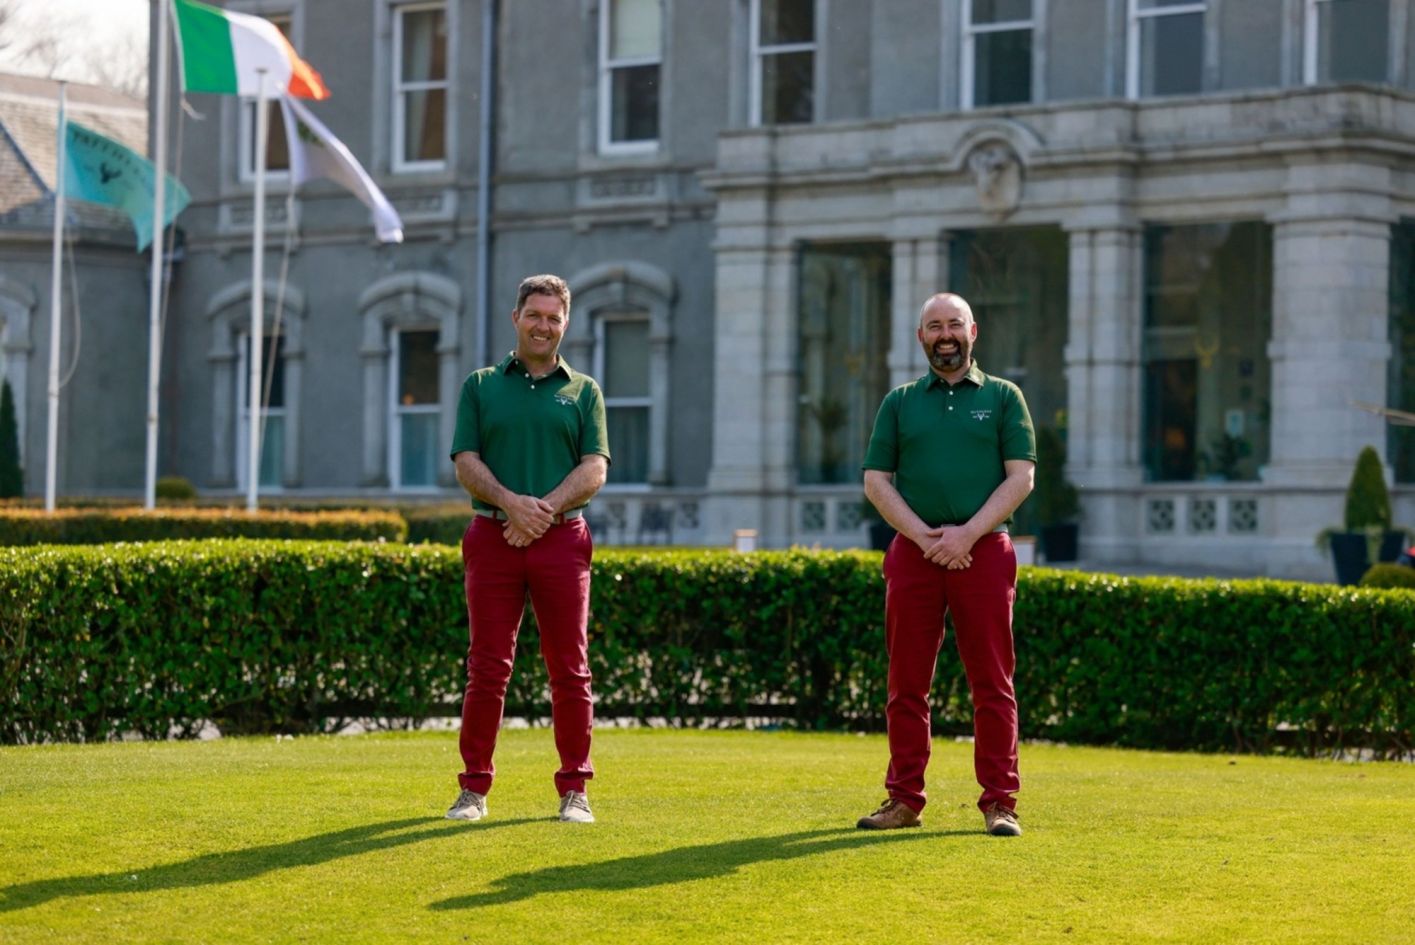 Derry and Karl - Golf Pro and Director of Golf